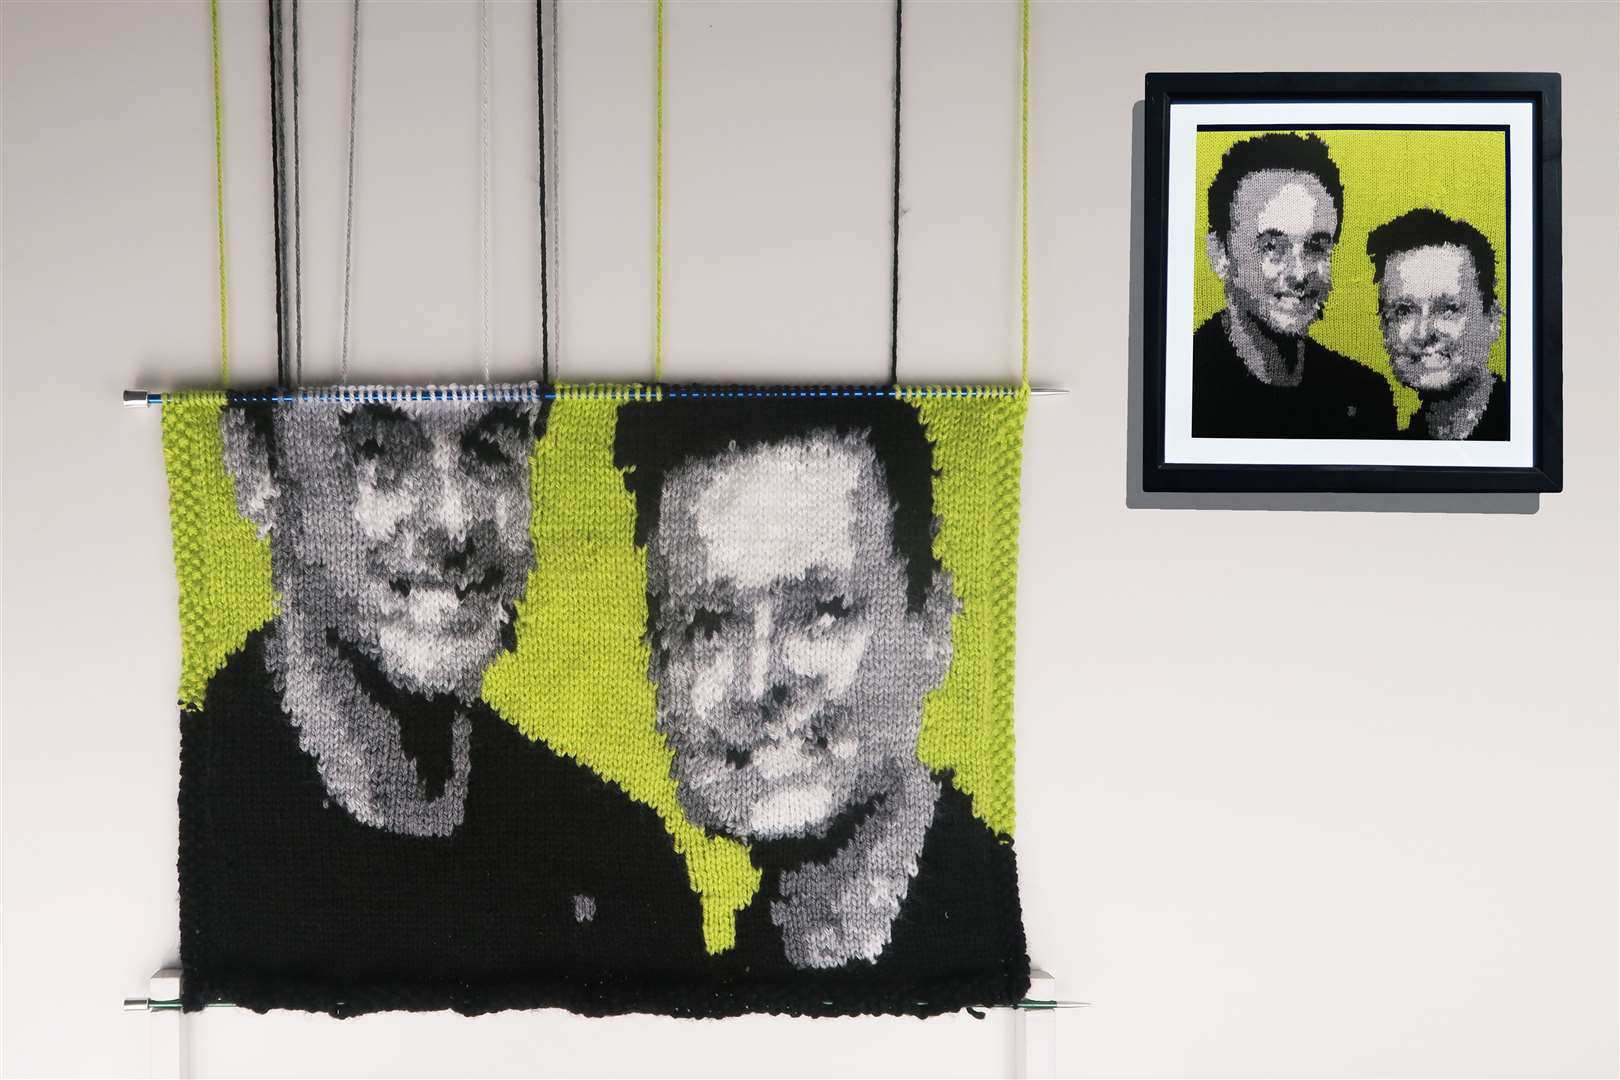 Knit It's first product transforms a photo into a knitting pattern and provides people with a kit to knit it. Lucy work has included an image of Ant and Dec.